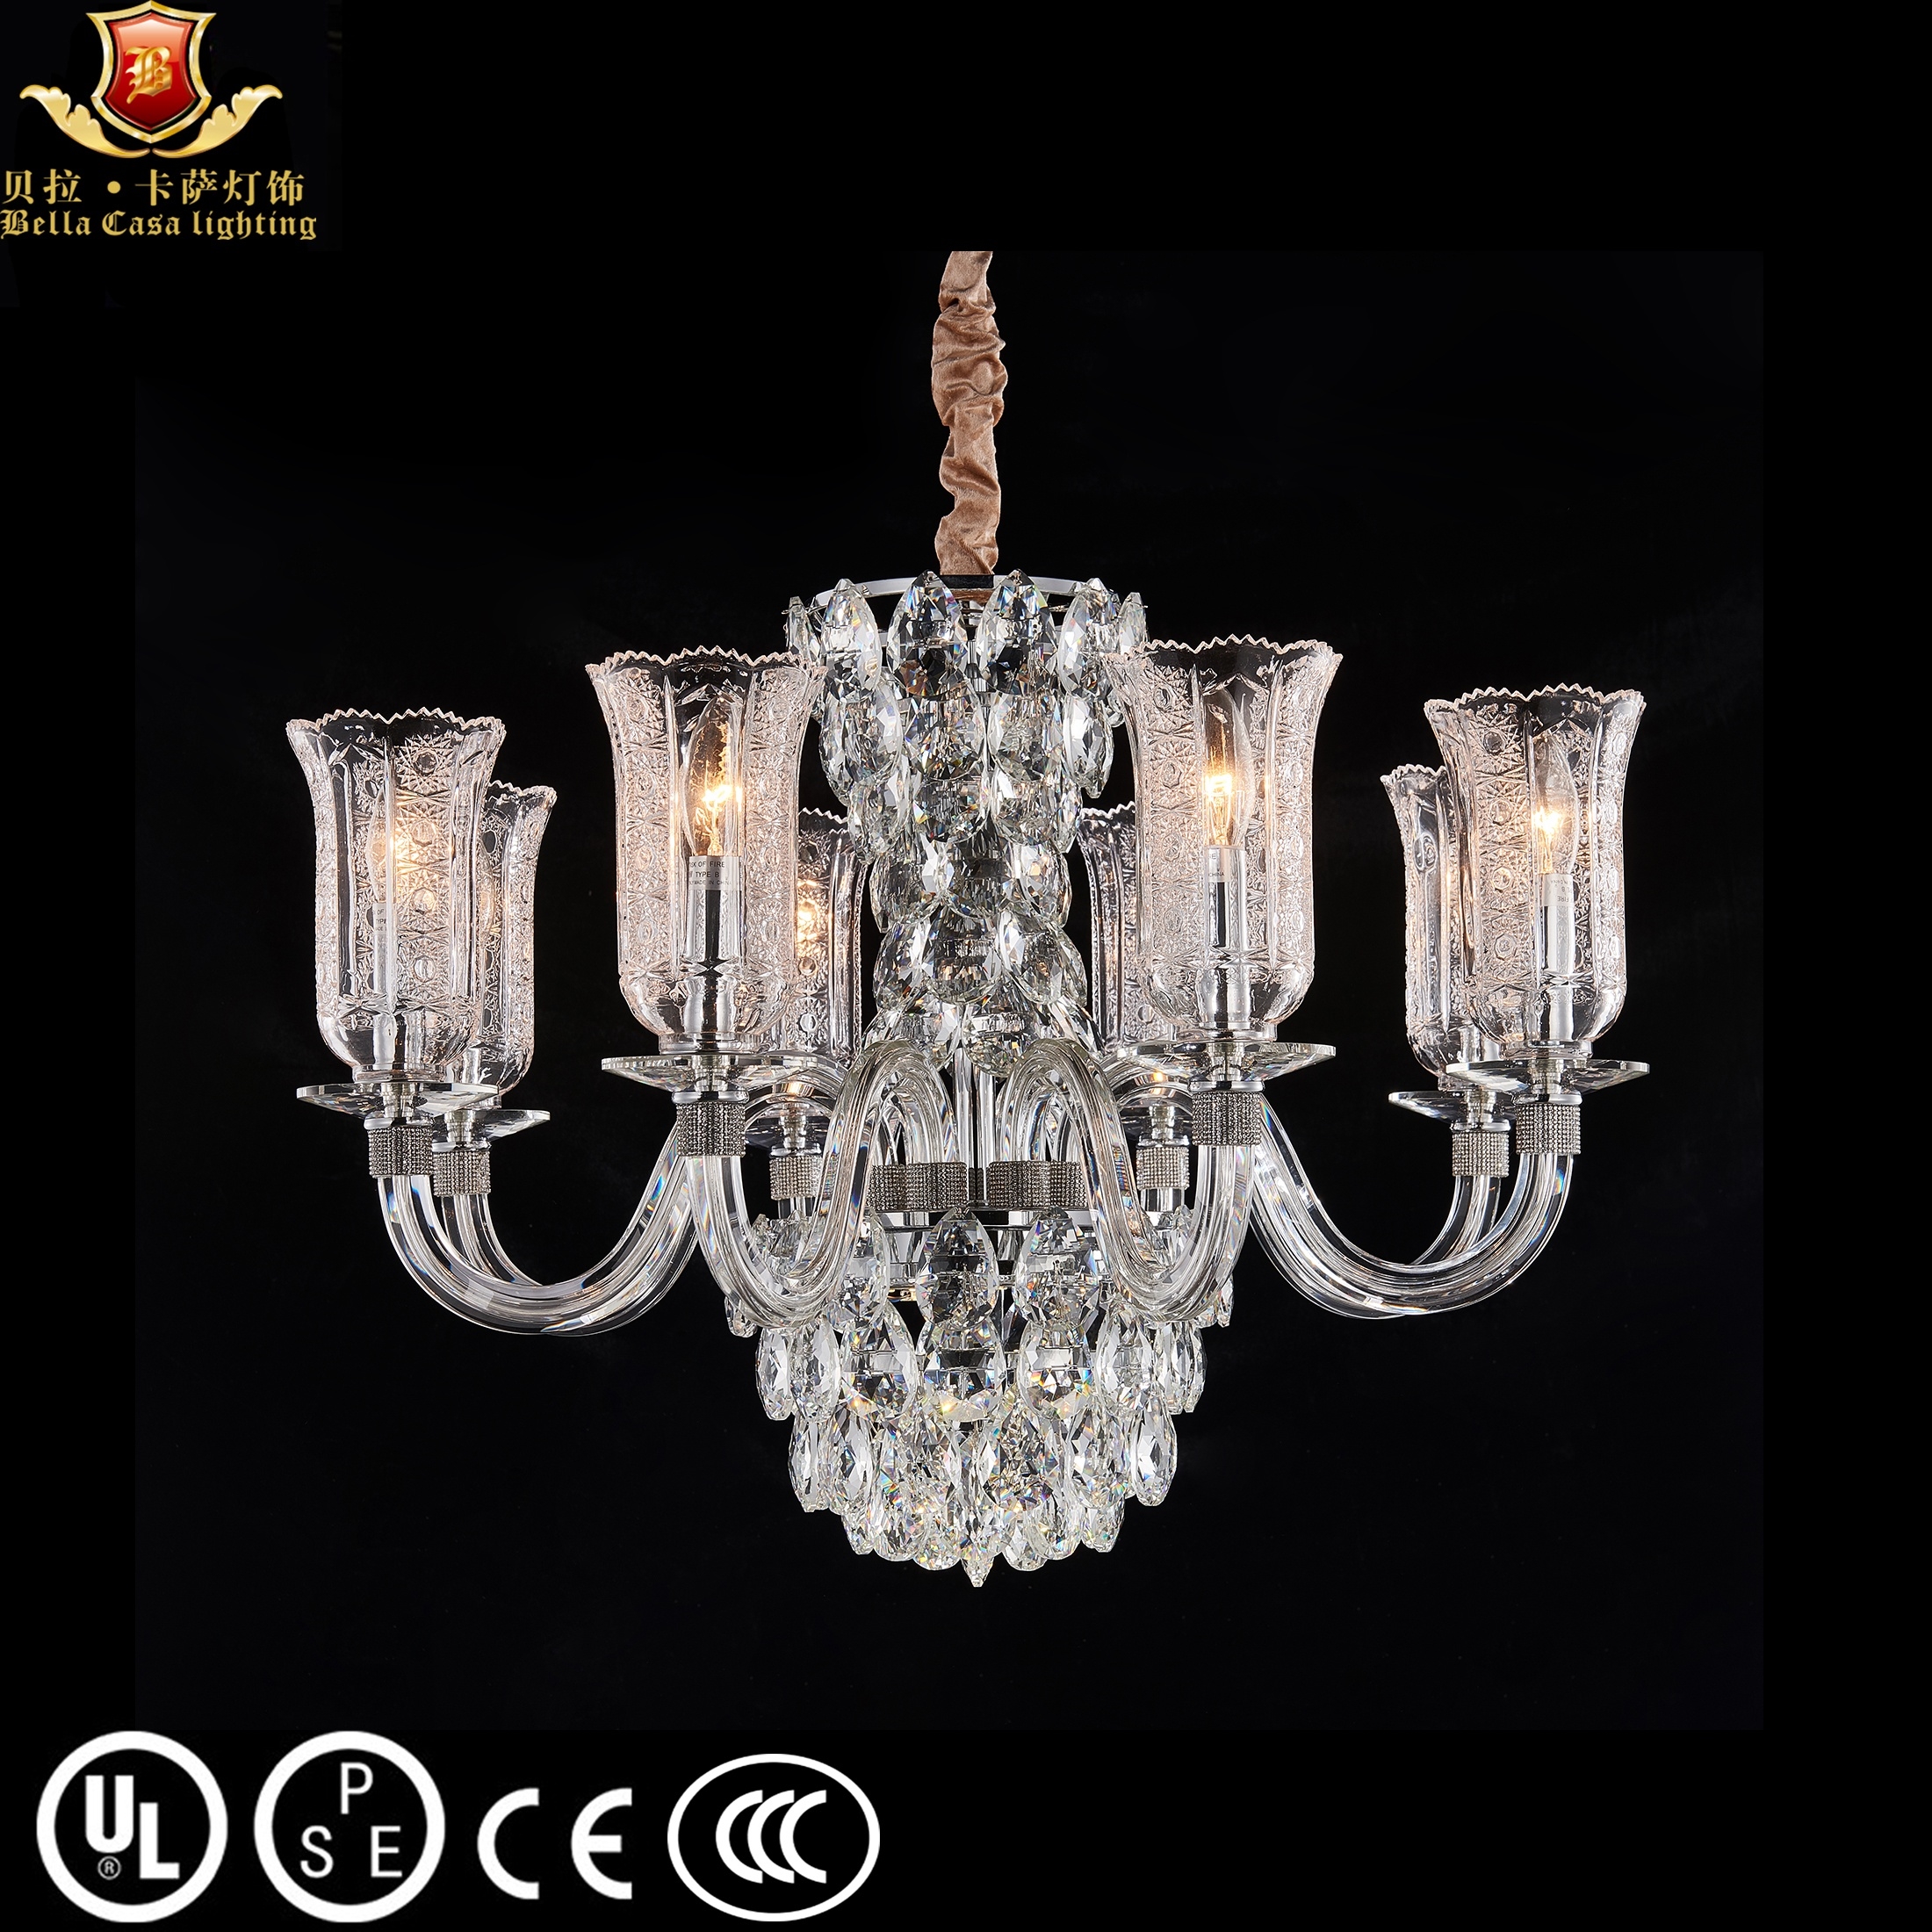 Latest Design Classical 6 Lights chrome lampshade clear crystal chandelier on sale Glass Pendant Lam